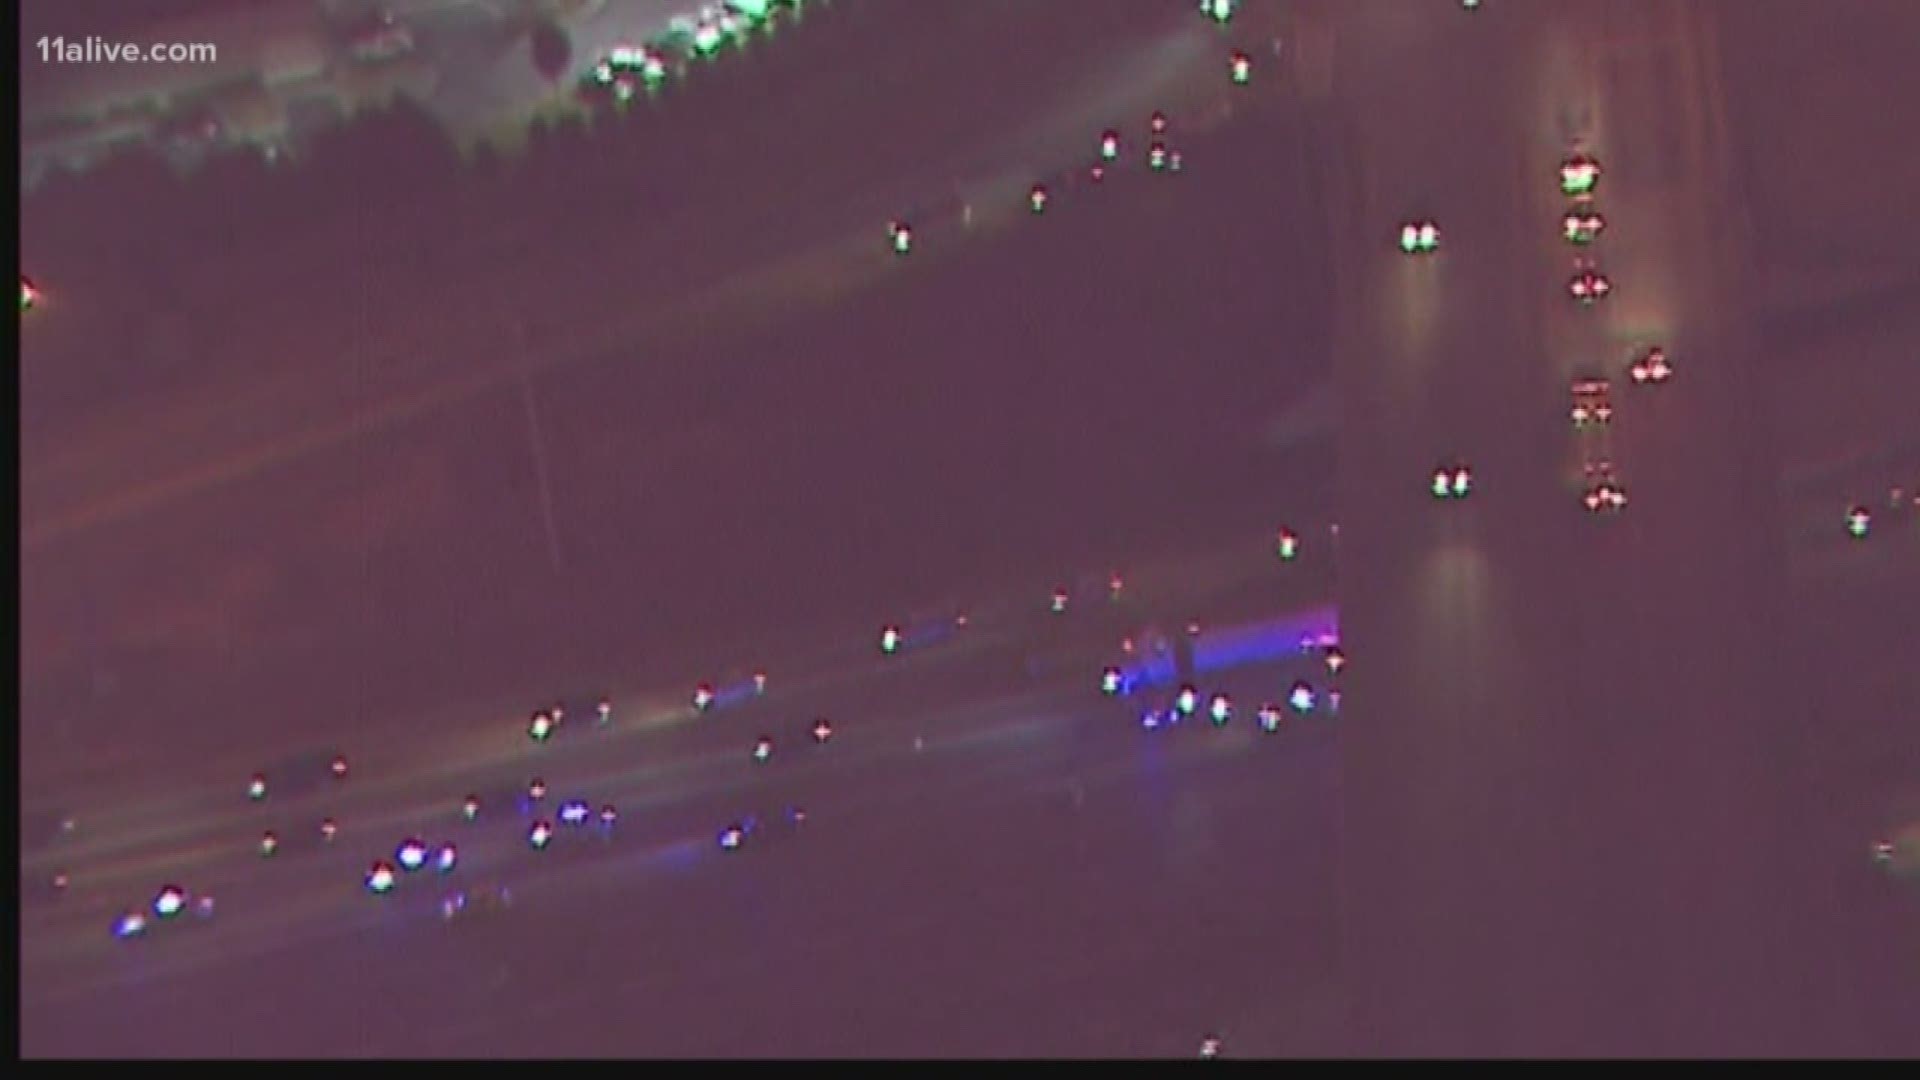 All lanes were blocked on I-85 southbound at Boggs Road after the early morning incident.